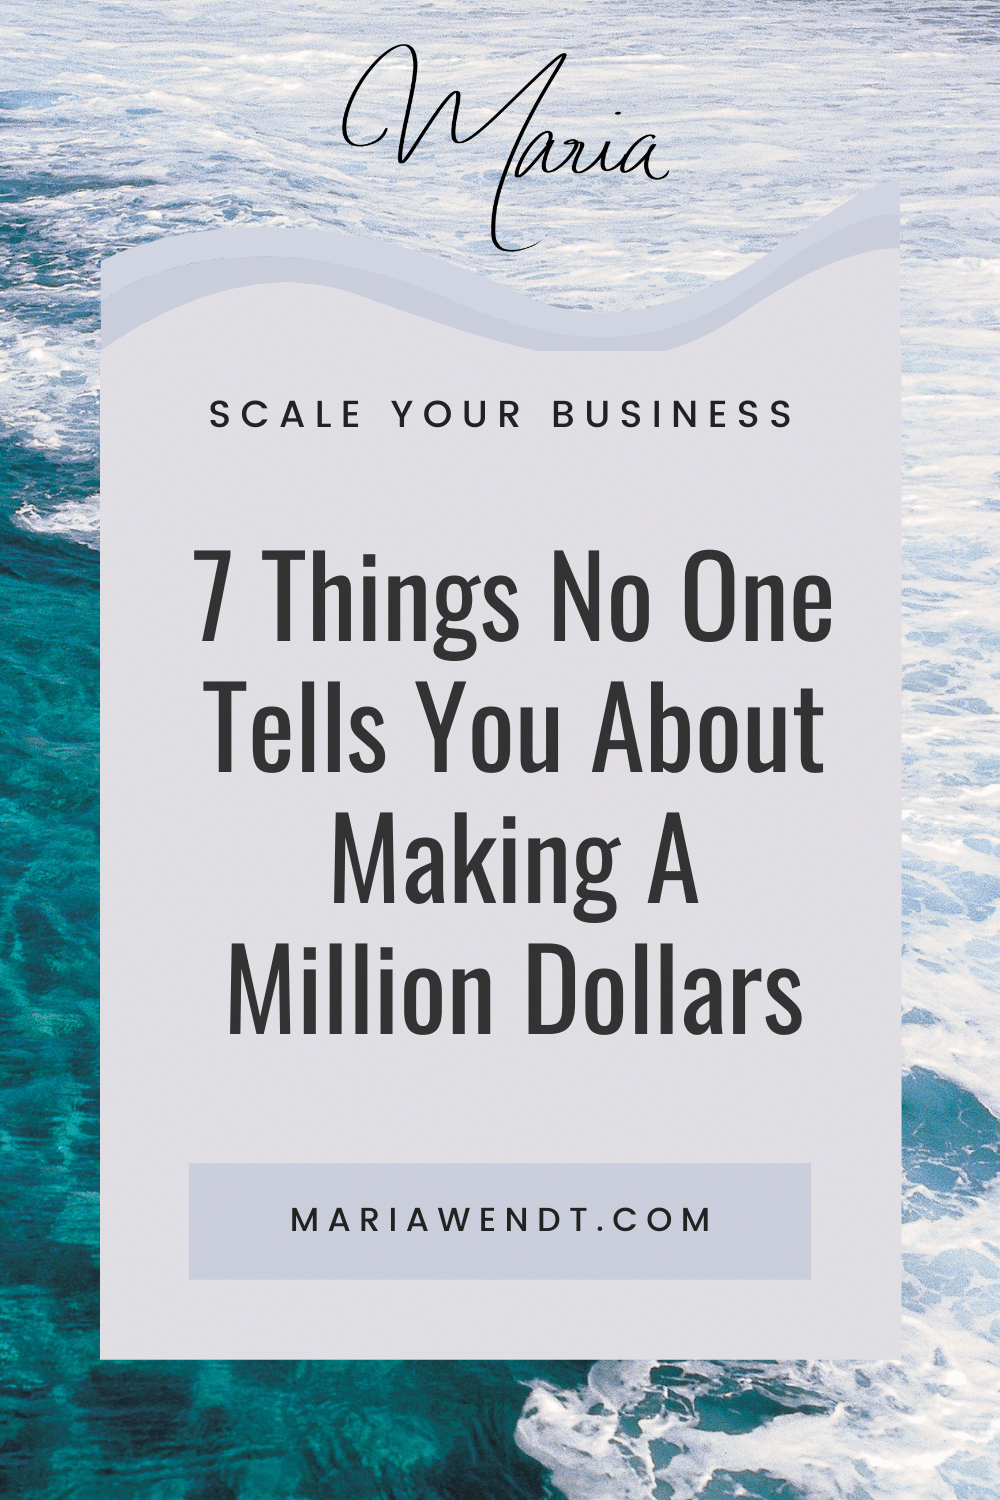 7 Things No ONe Tells You About Making A Million Dollars